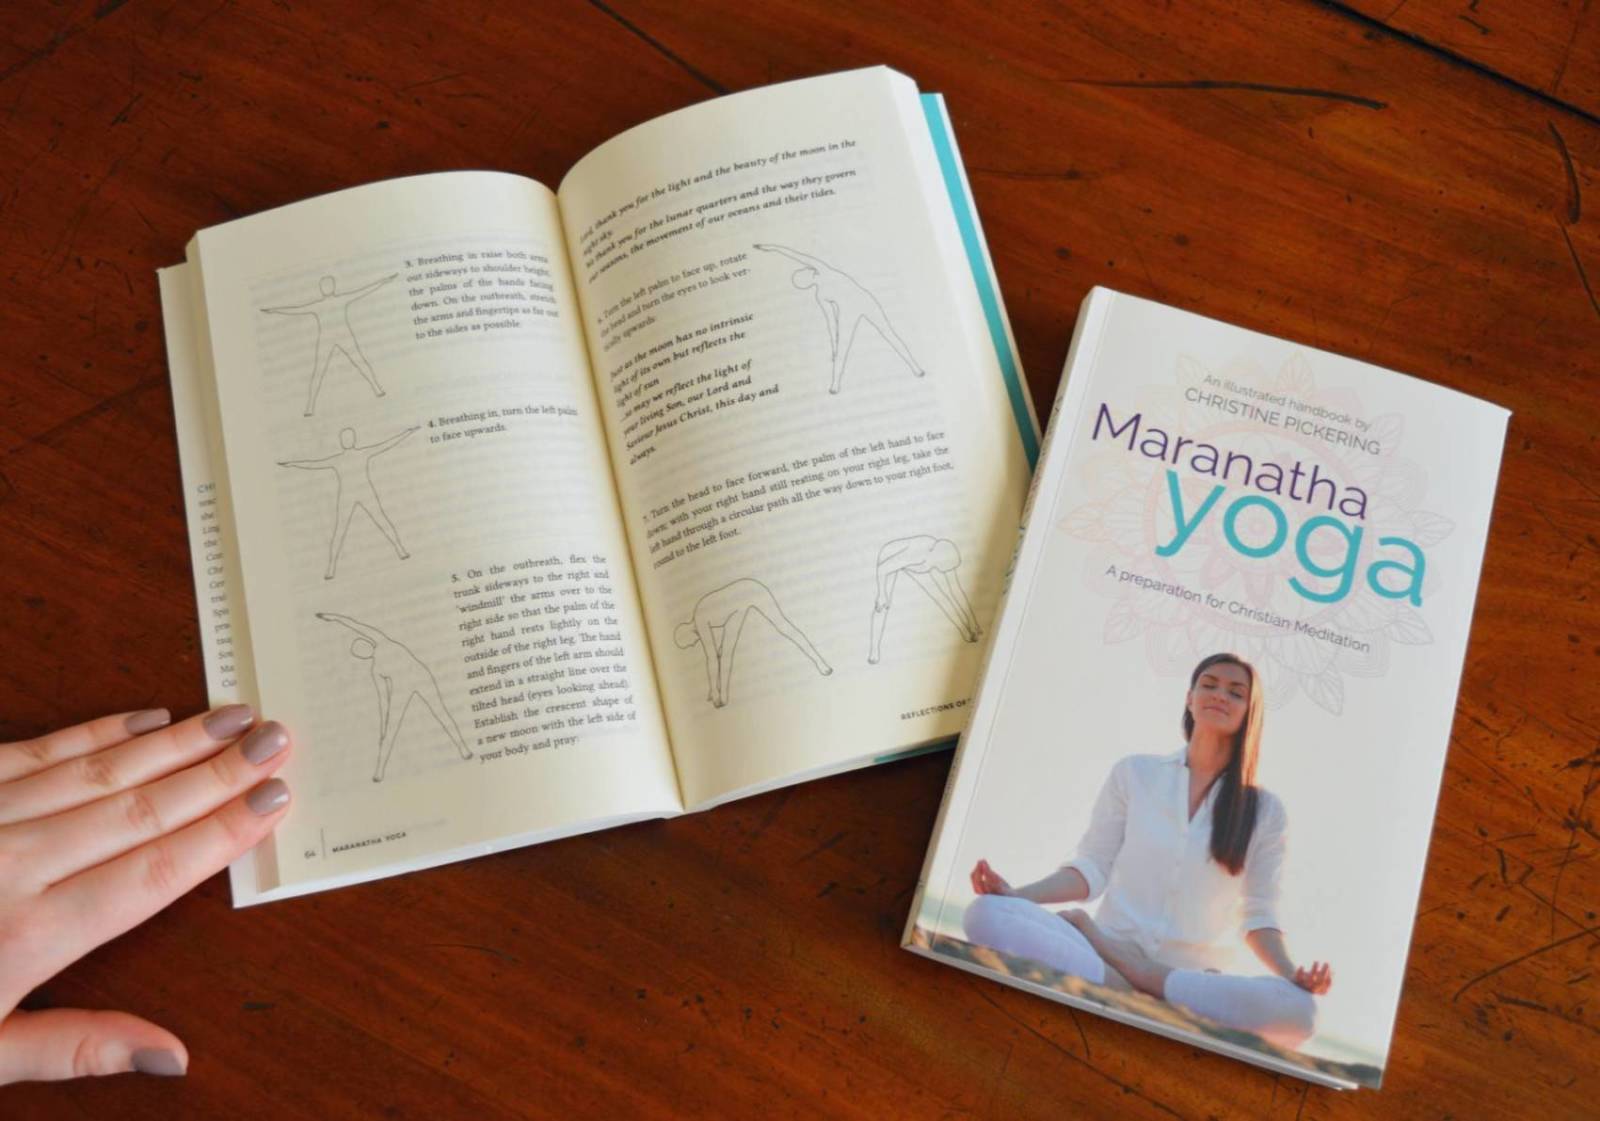 Maranatha Yoga book held open by hand, next to a closed copy